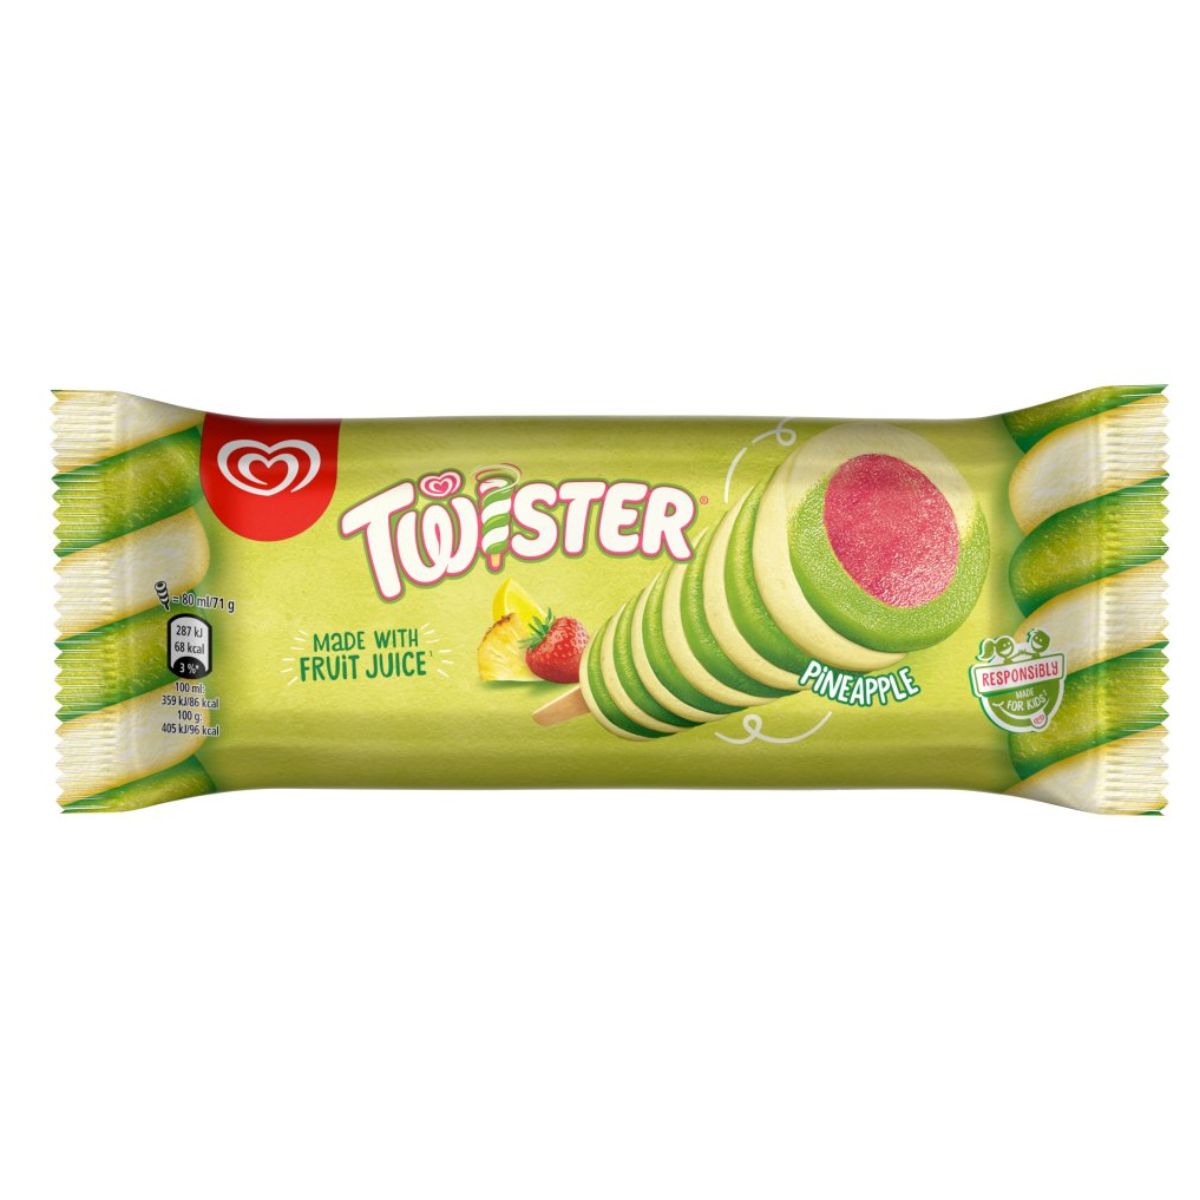 A Walls - Twister - 80ml packaging with fruit images and a "made with fruit juice" label.